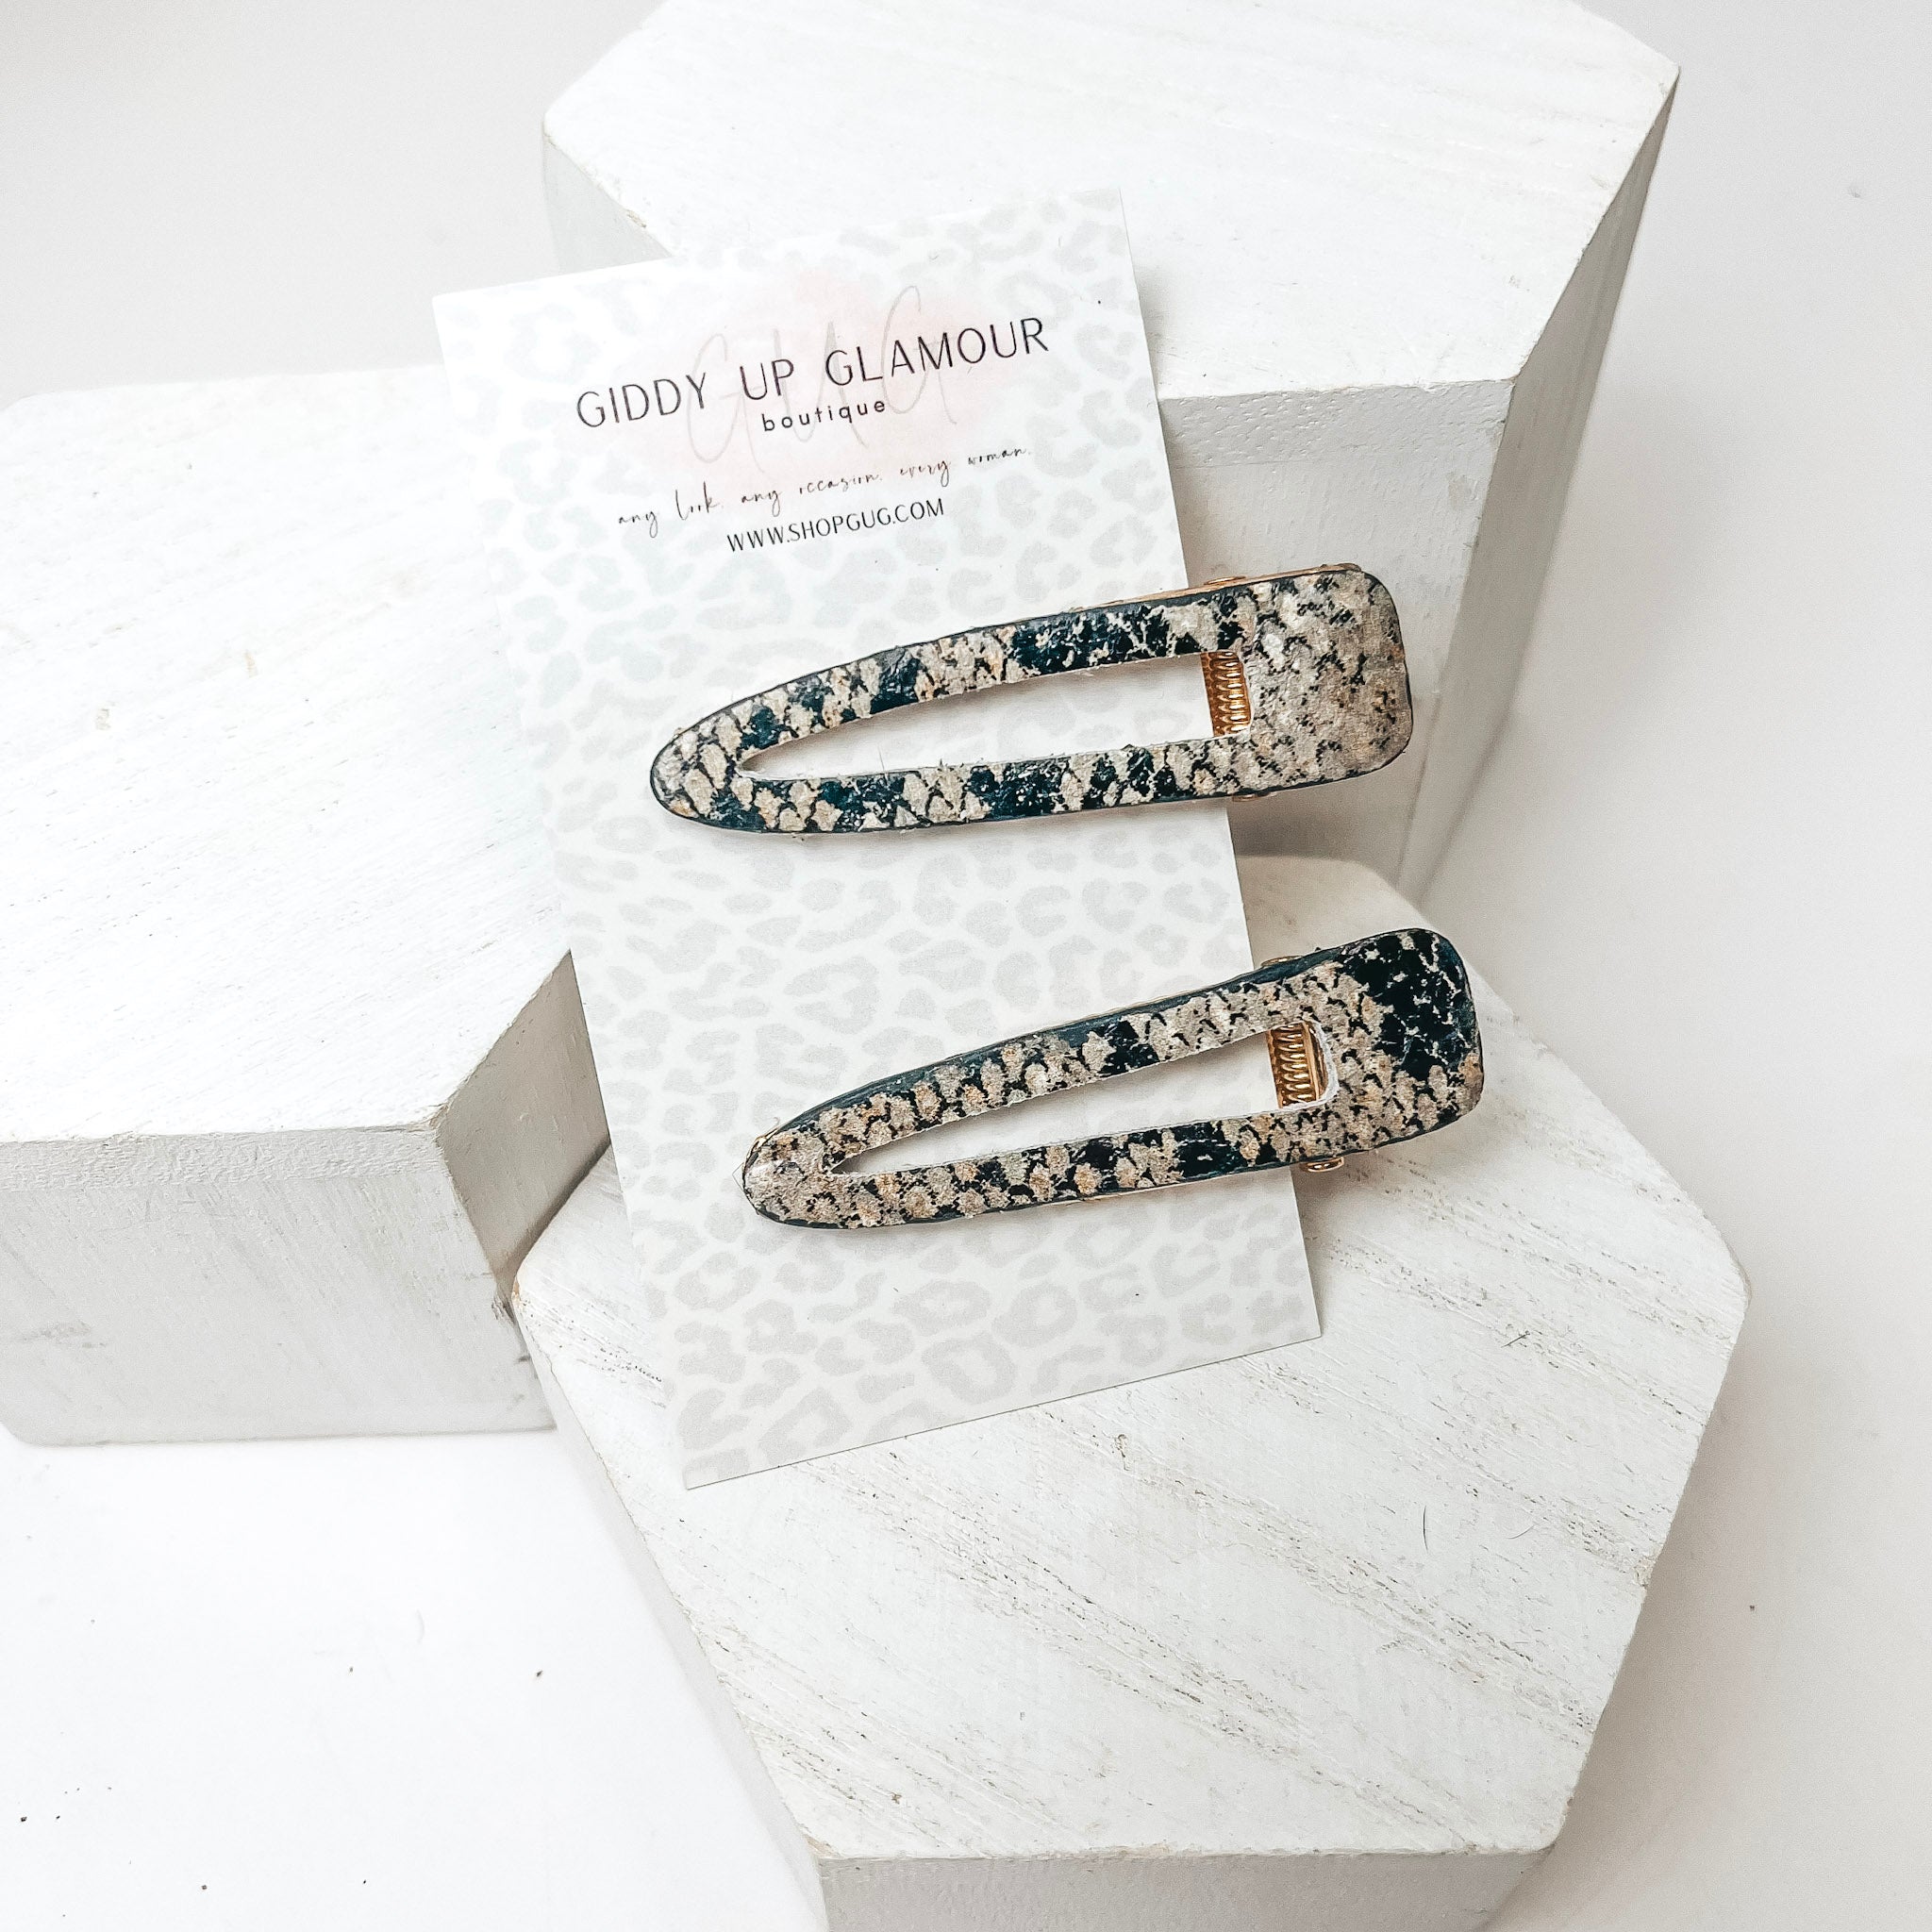 Triangular Hair Clip Pair in Snakeskin - Giddy Up Glamour Boutique